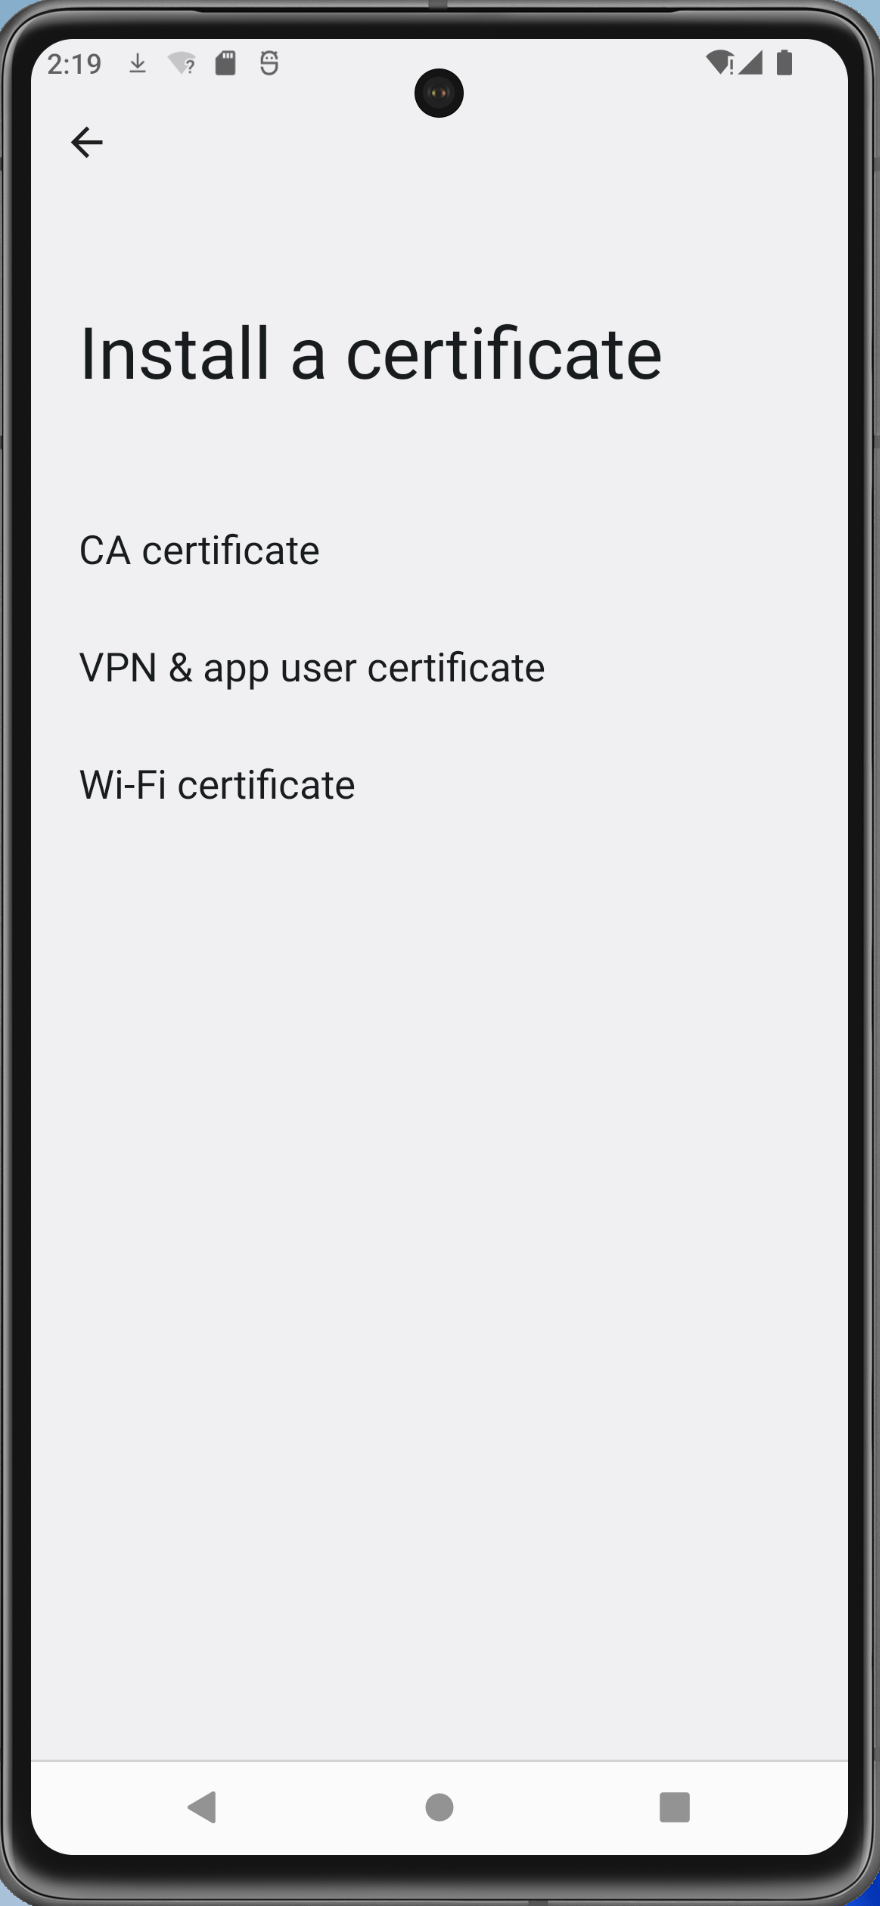 Android Virtual Device screenshot with the first step to install a certificate